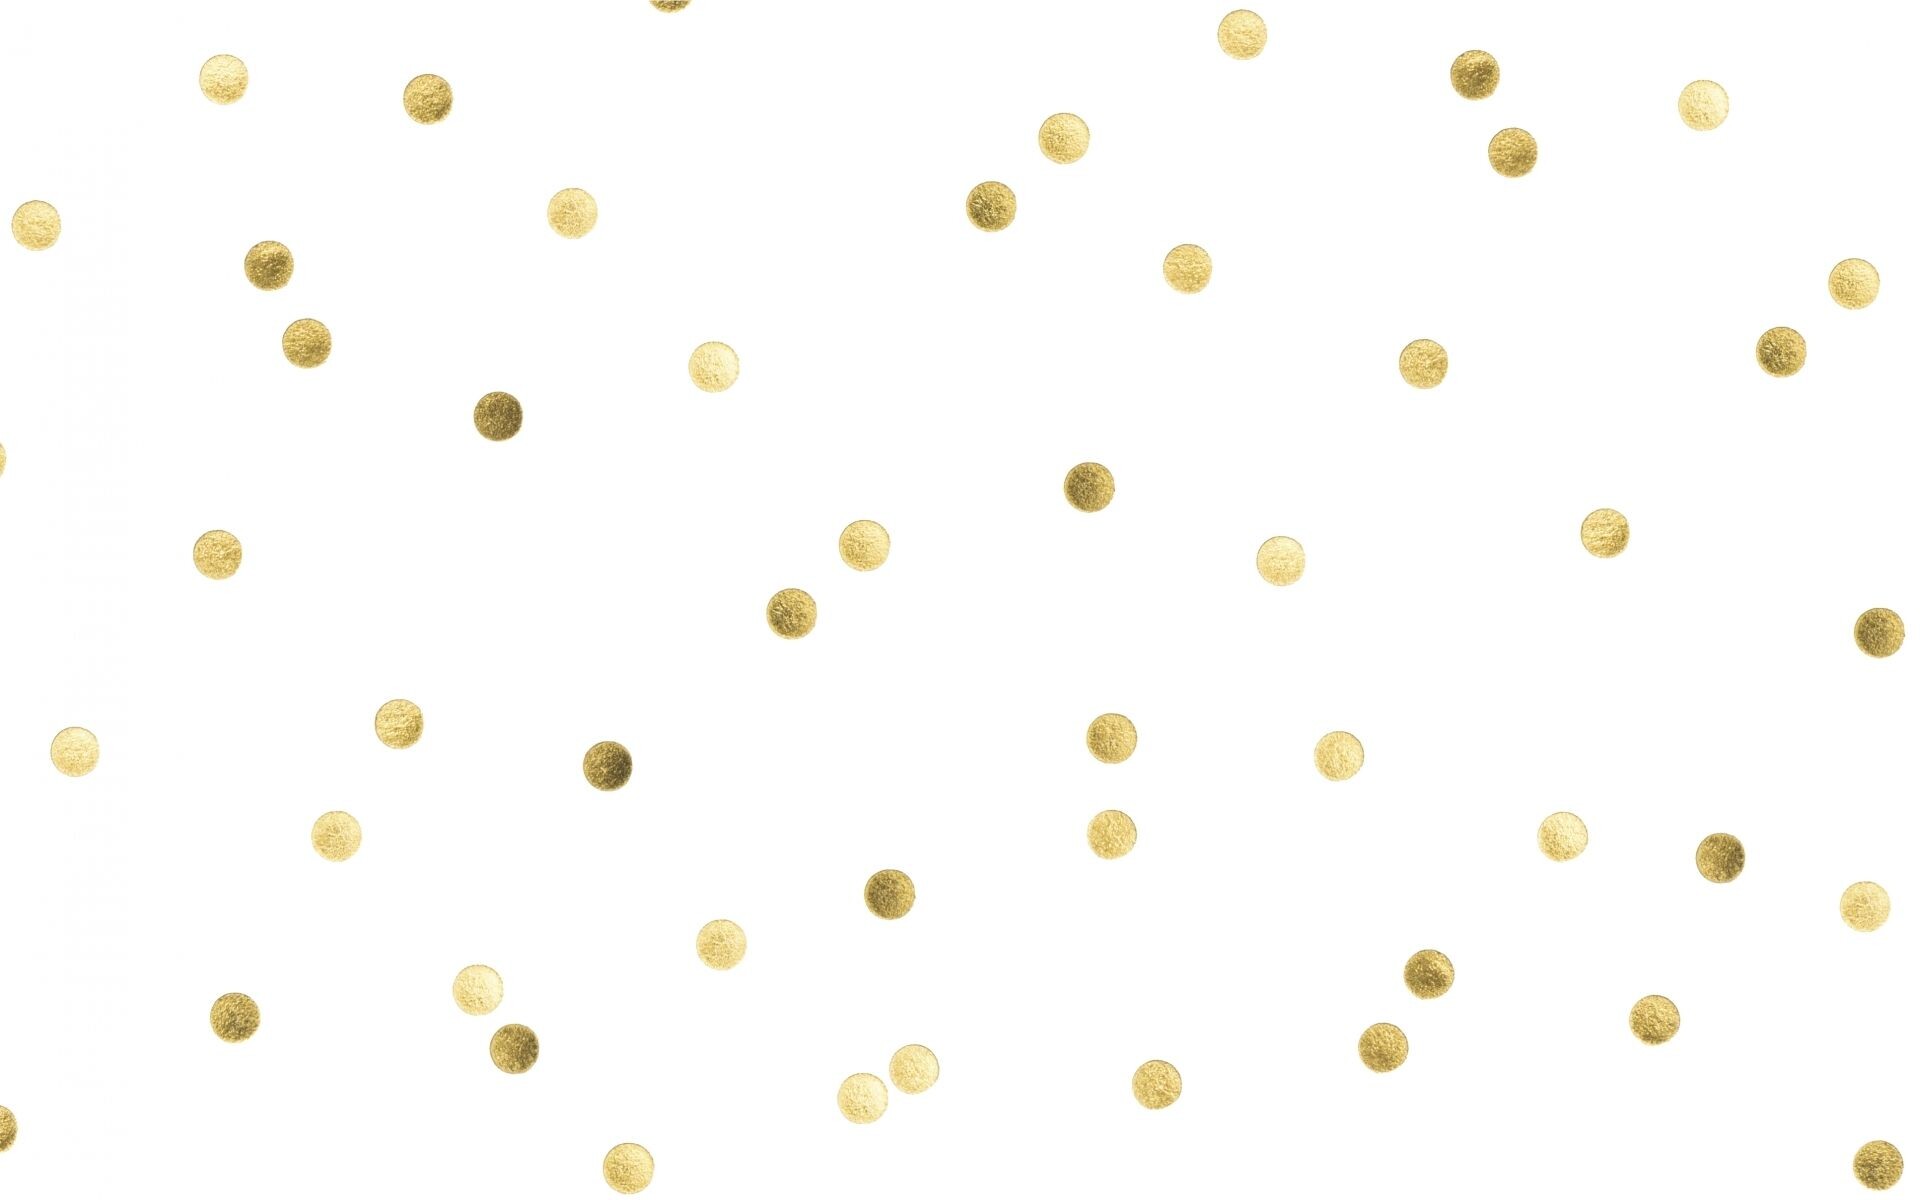 Gold Polka Dot: Glitter confetti, Gold spots for holiday decor enhancing the party theme. 1920x1200 HD Wallpaper.